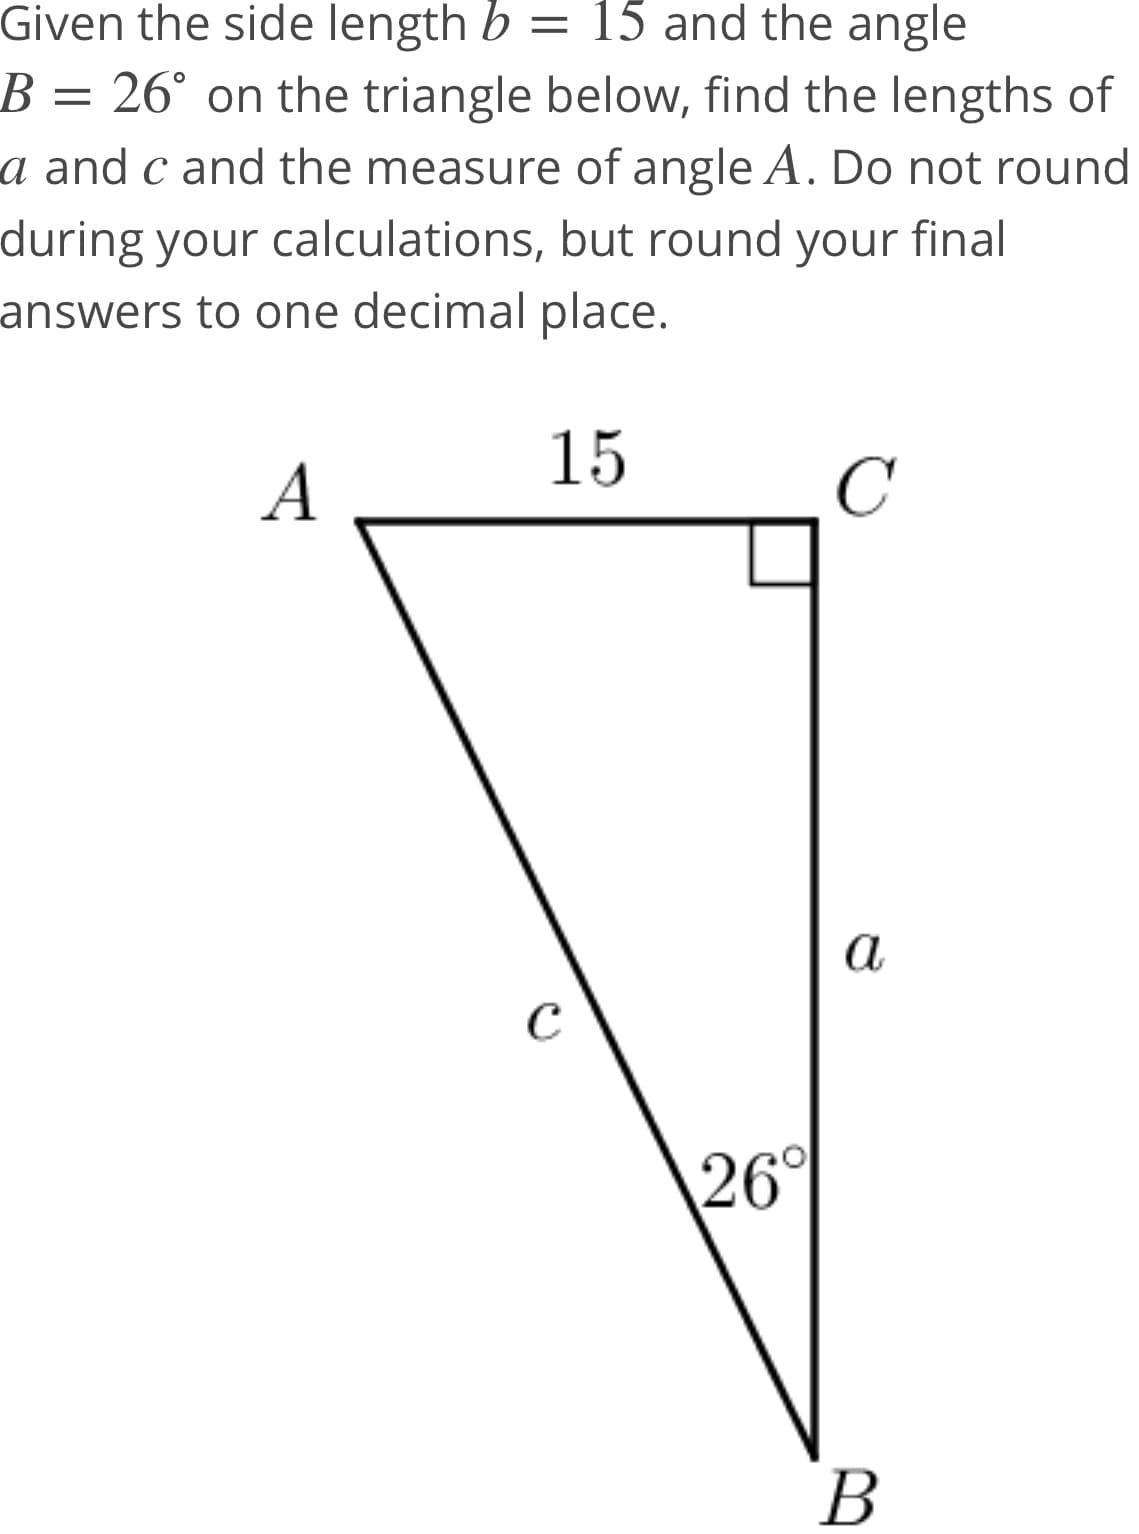 Given the side length b = 15 and the angle
B = 26° on the triangle below, find the lengths of
a and c and the measure of angle A. Do not round
during your calculations, but round your final
answers to one decimal place.
15
A
C
a
C
26°
В
